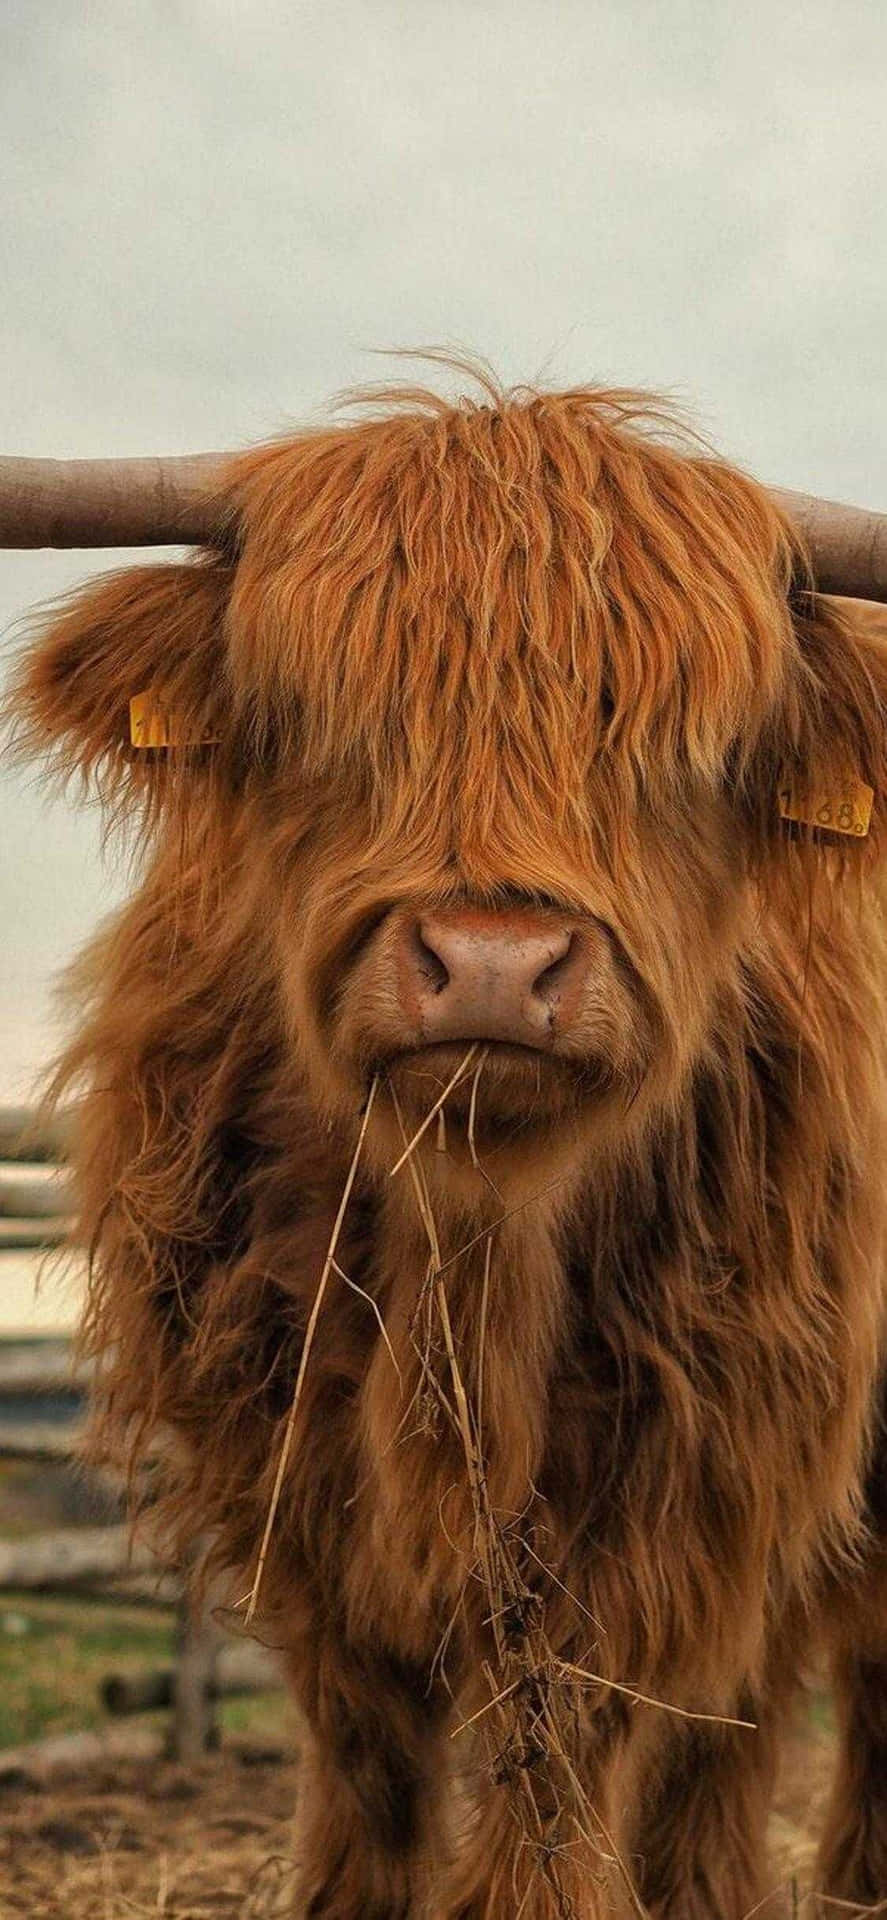 Fluffy Highland Cow Chewing Straw Wallpaper